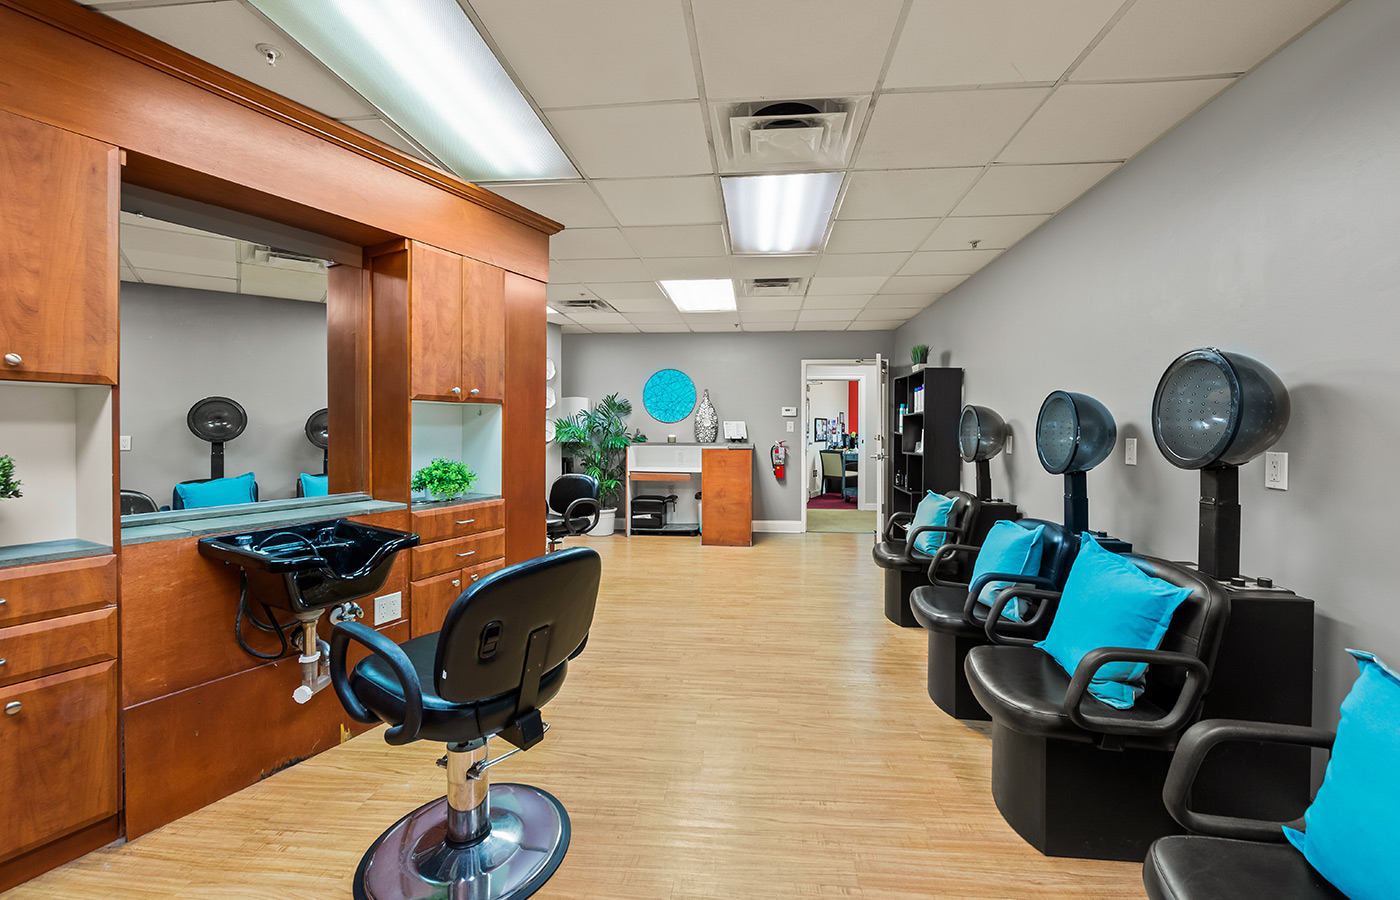 The salon with many stations for styling and drying hair.